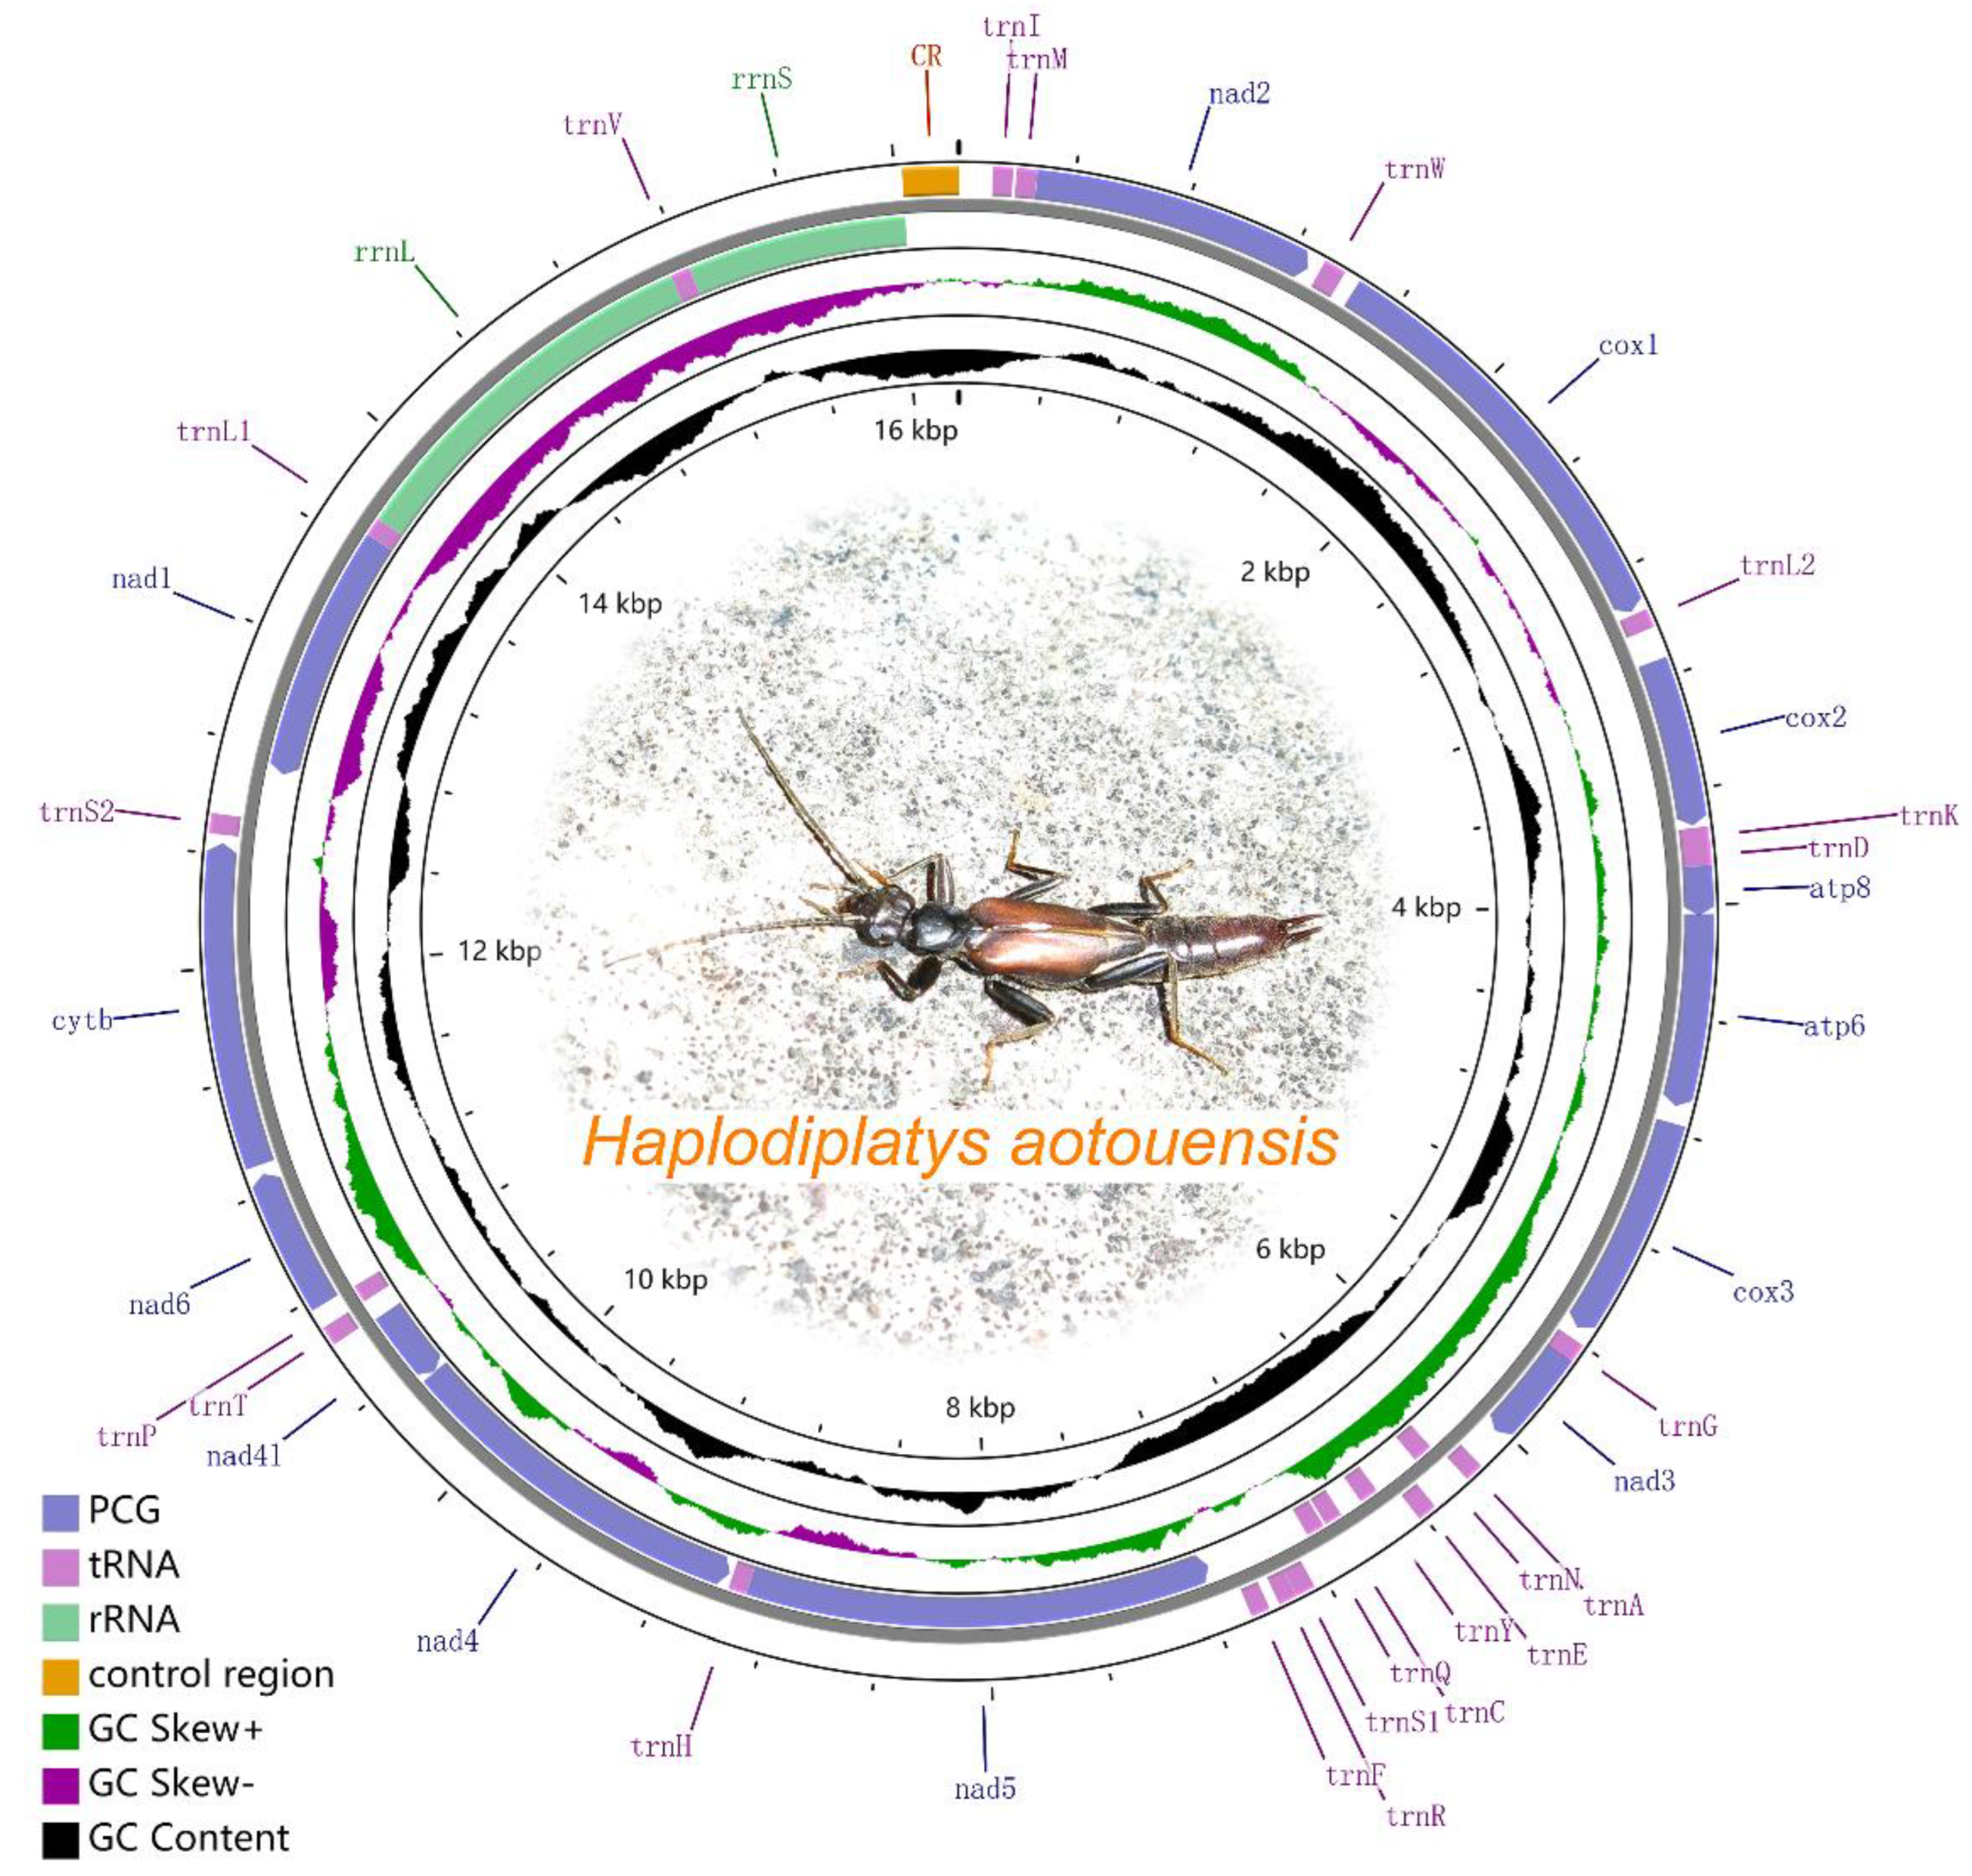 Biology | Free Full-Text | The First Mitochondrial Genomes of the Family  Haplodiplatyidae (Insecta: Dermaptera) Reveal Intraspecific Variation and  Extensive Gene Rearrangement | HTML